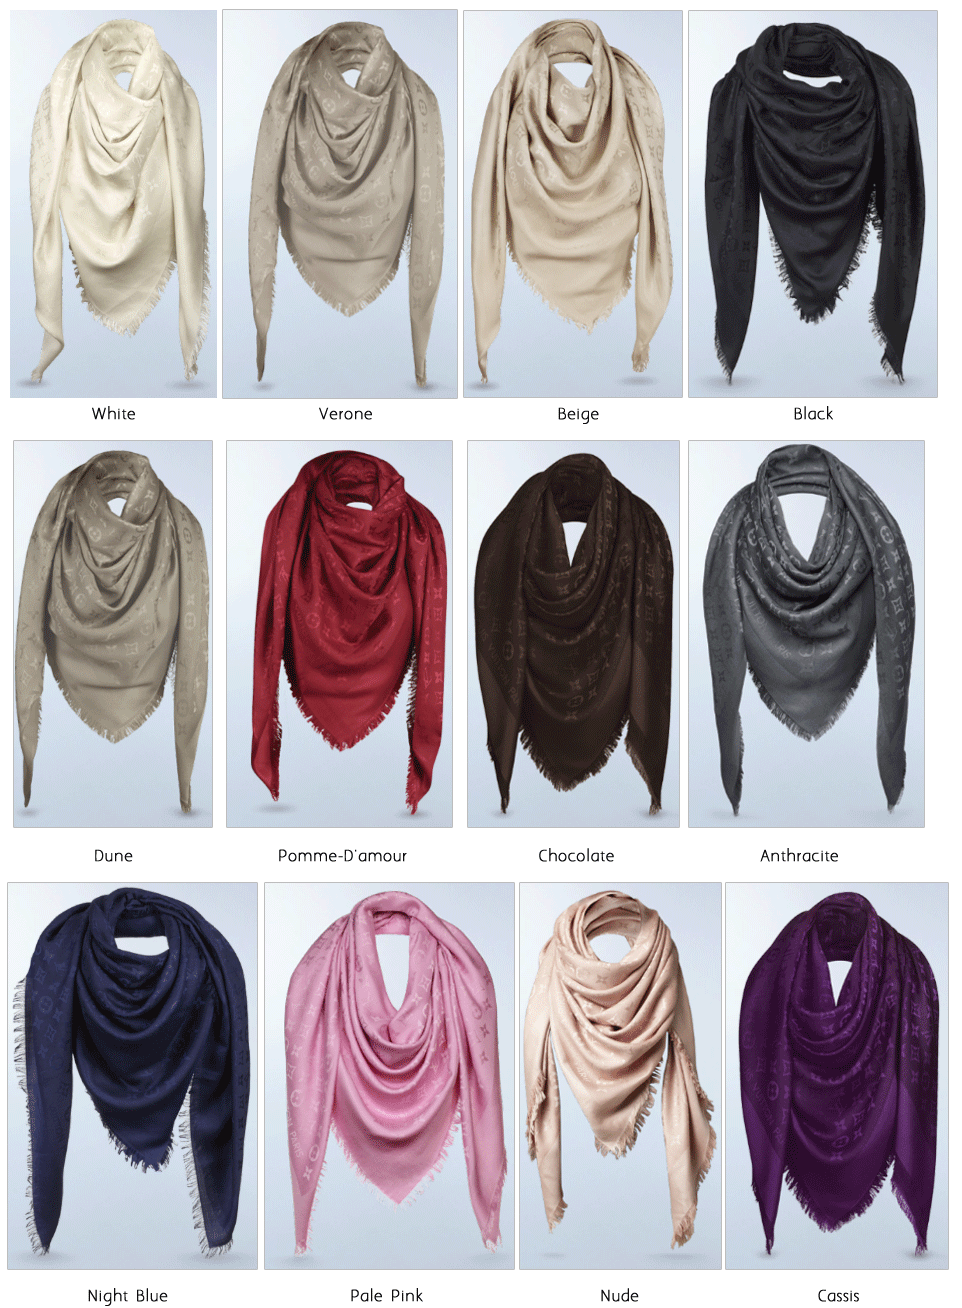 Which Color Would You Pick For The Louis Vuitton Monogram Shawl?